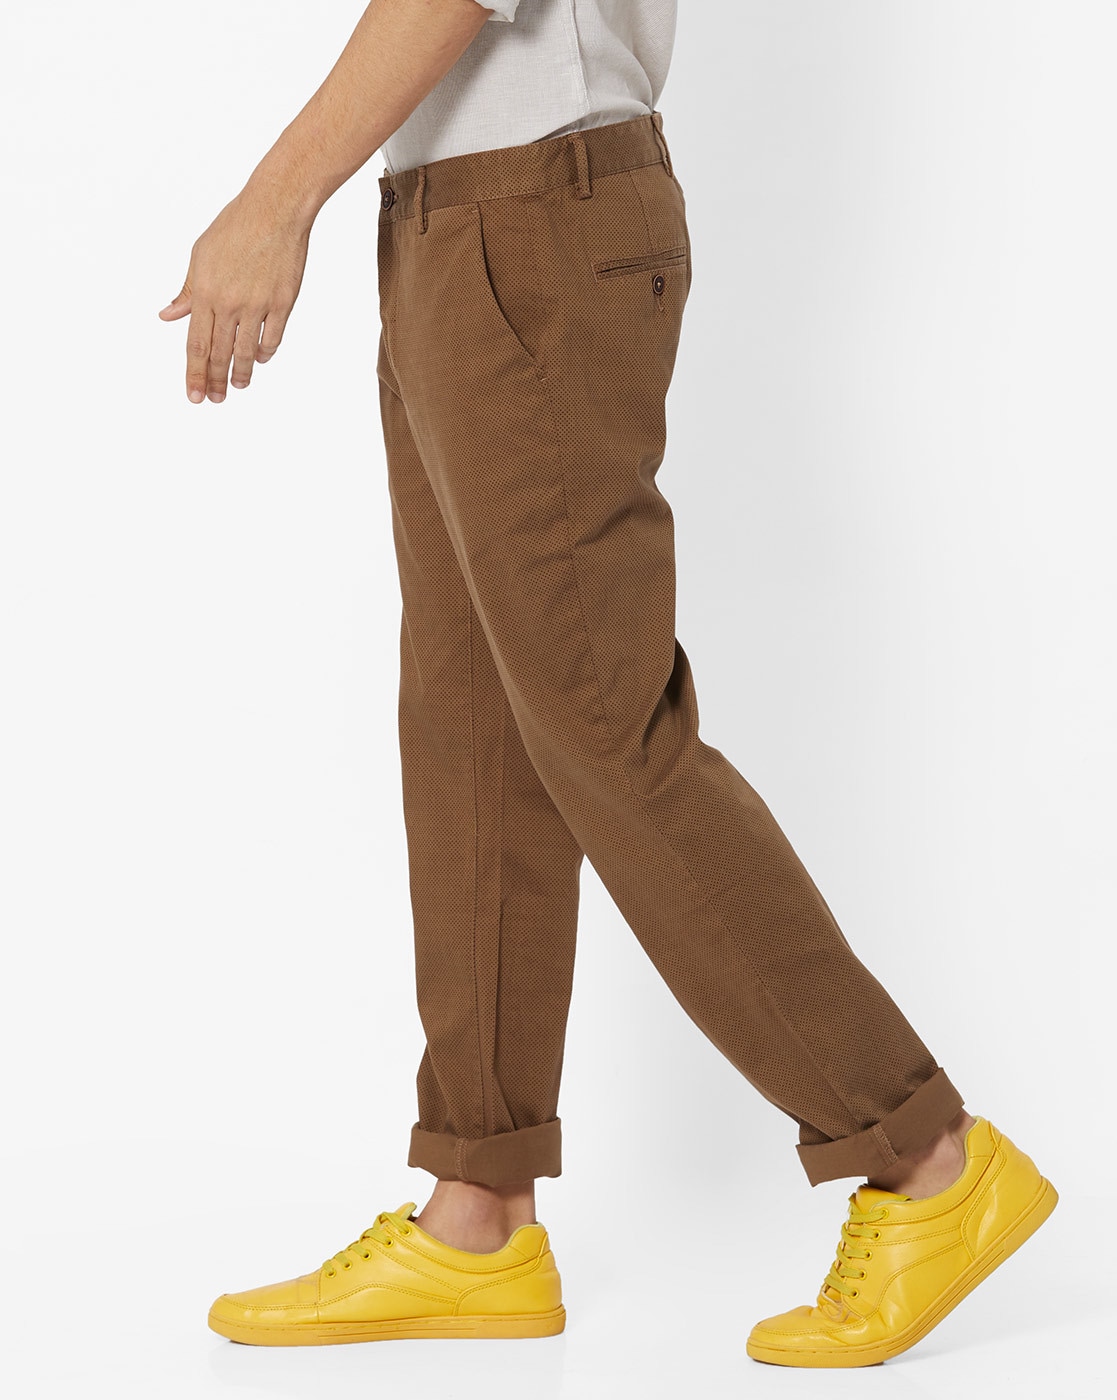 TINTED Trousers and Pants  Buy TINTED Crepe Regular Fit Mustard Trouser  Online  Nykaa Fashion